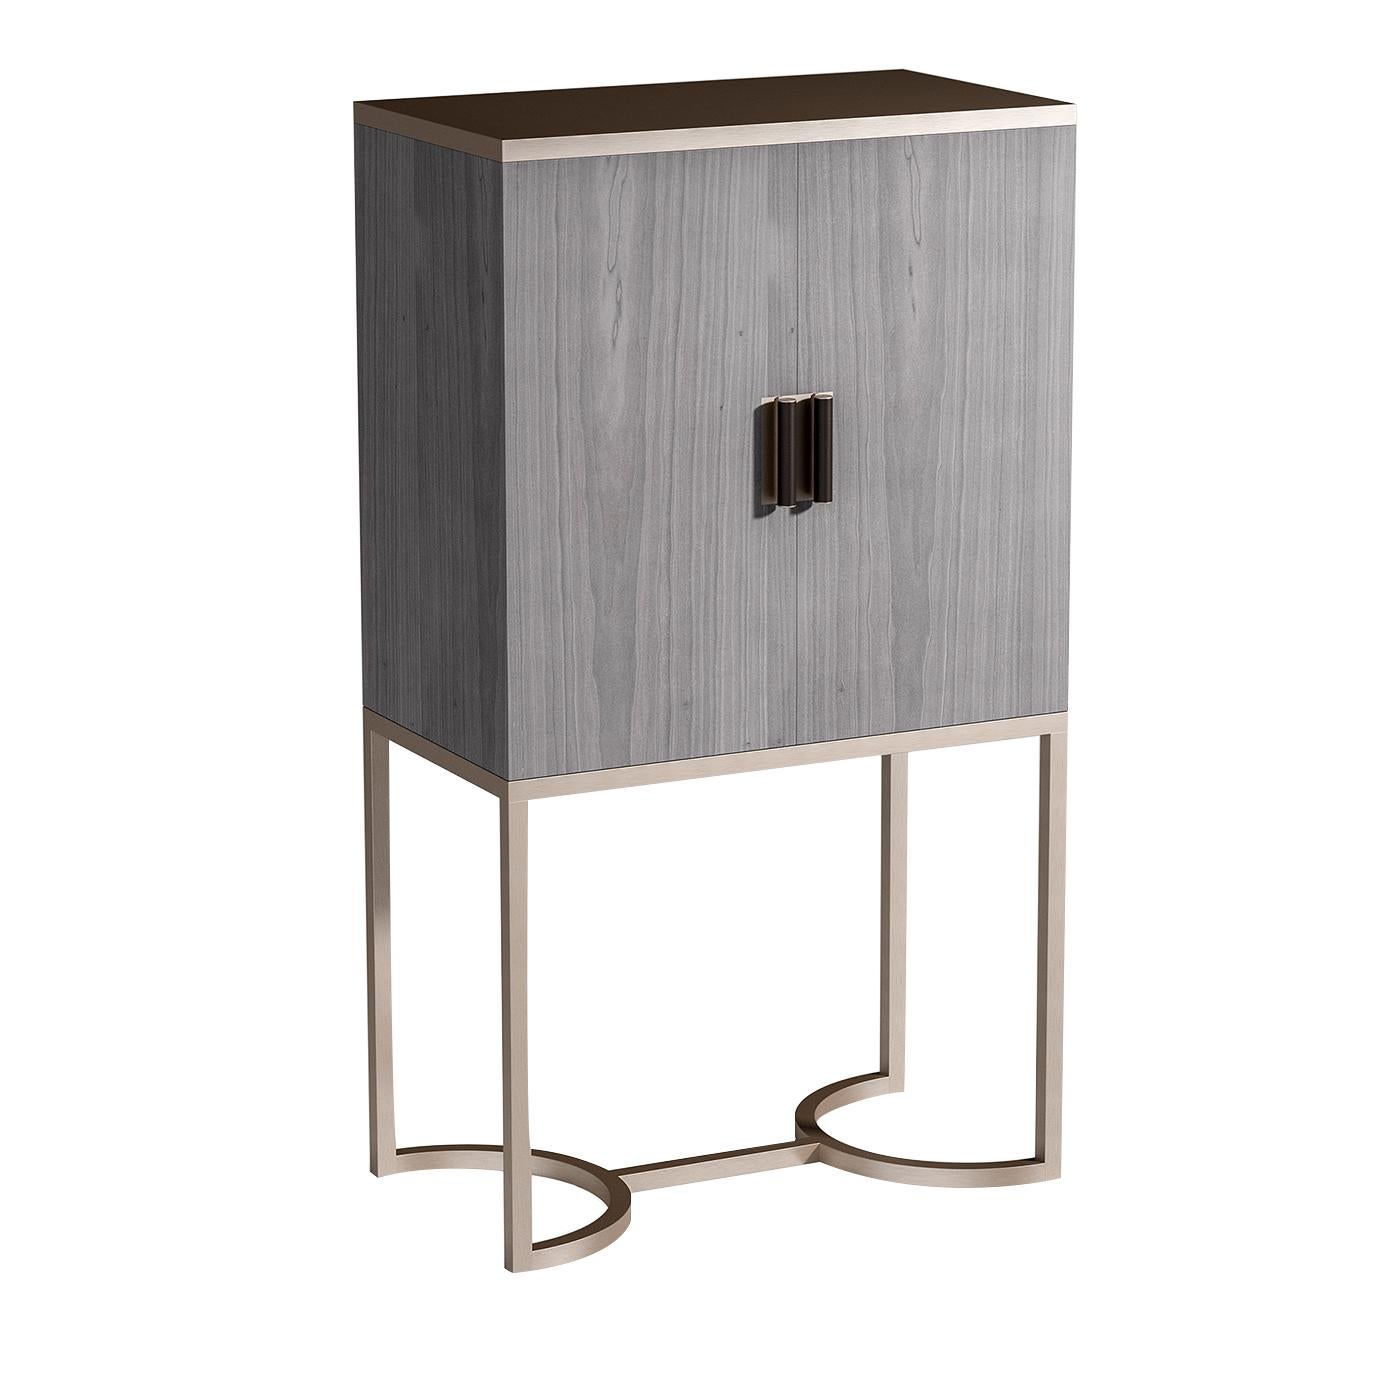 A Classic design with a modern touch, this sophisticated bar cabinet is characterized by a sleek Silhouette and bold architectural metal legs with two semicircles connected by a central bar. The square gray veneered wood cabinet has two doors with